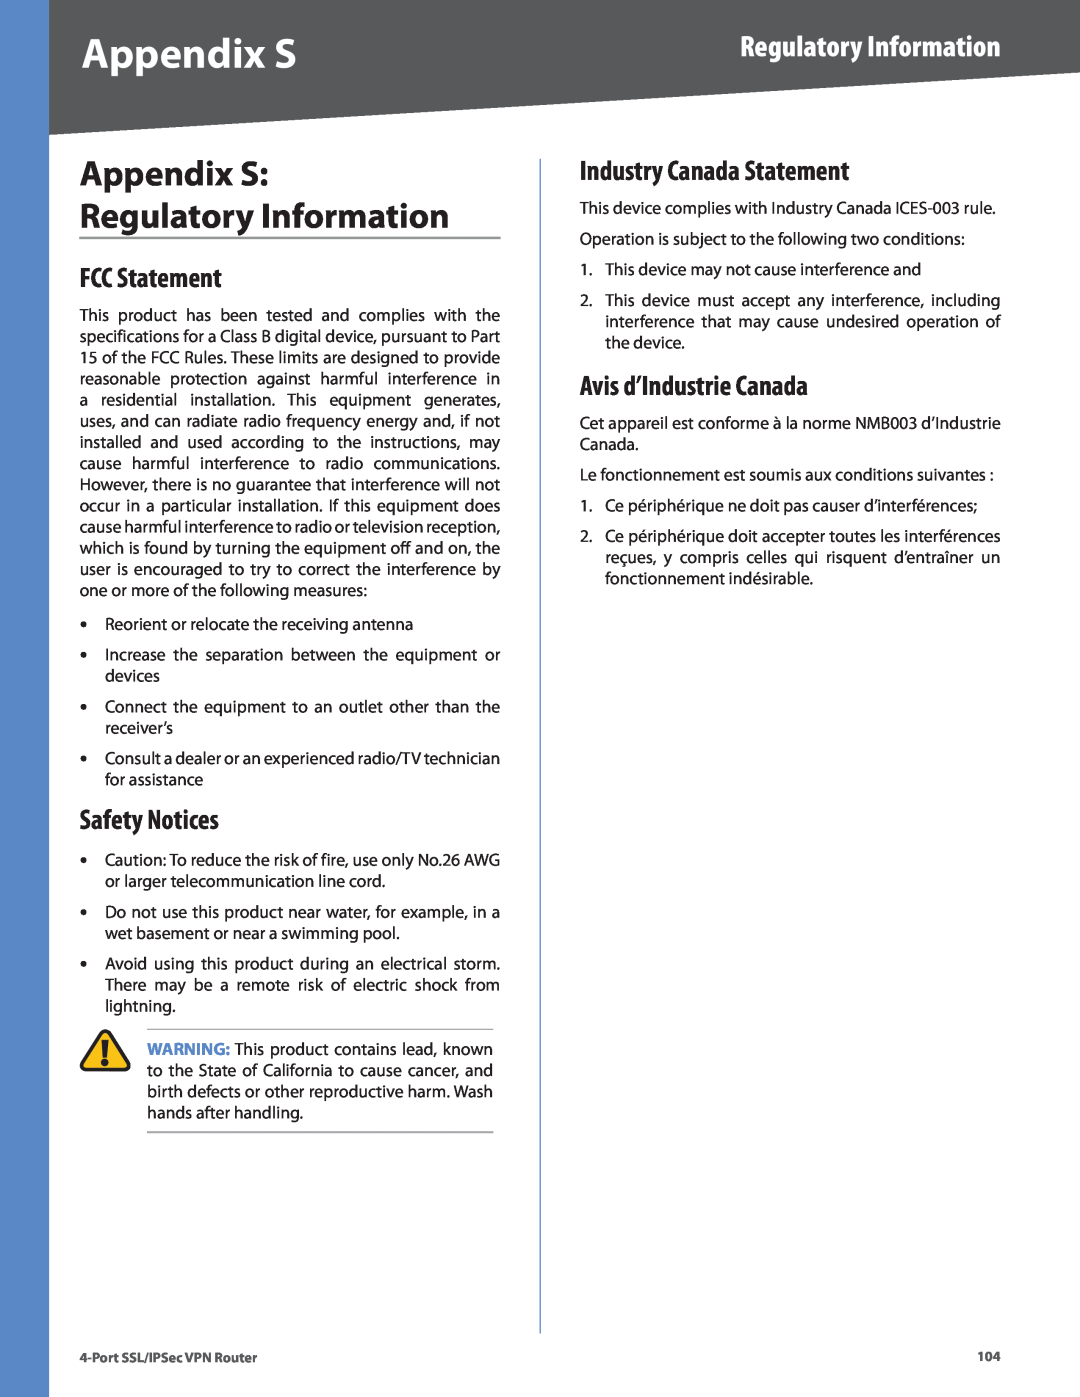 Cisco Systems RVL200 manual Appendix S Regulatory Information, FCC Statement, Safety Notices, Industry Canada Statement 